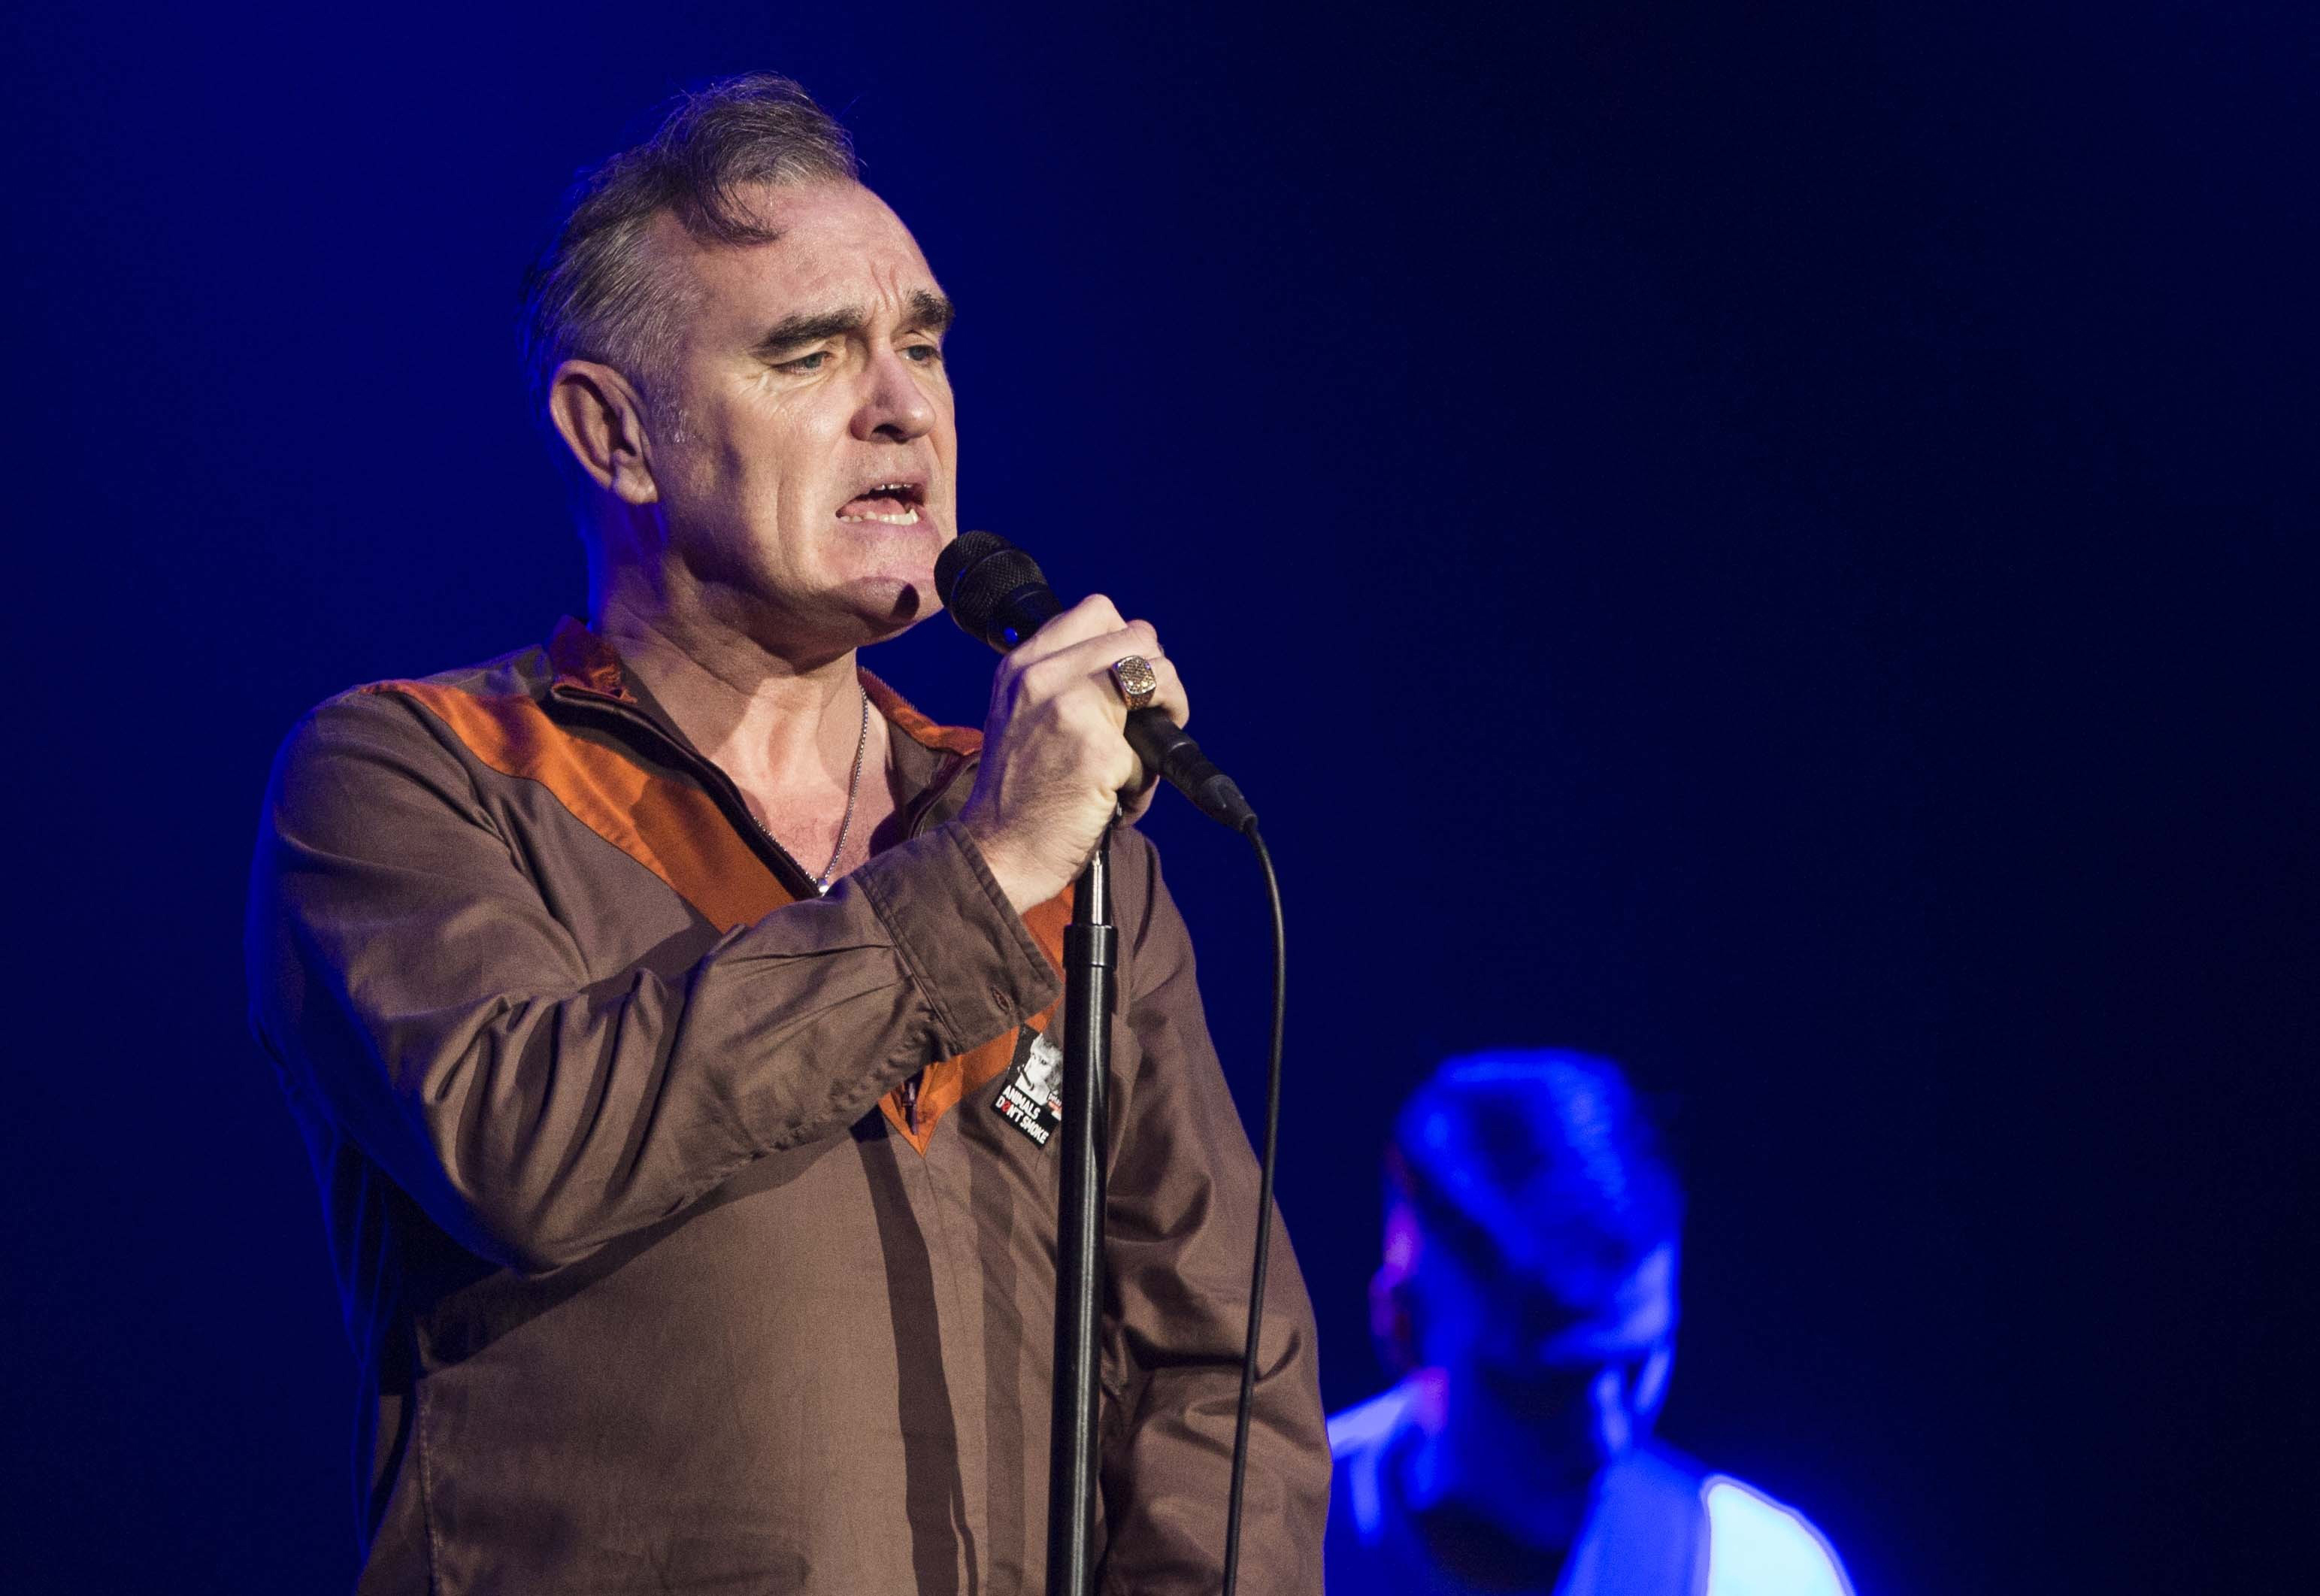 Morrissey performs on stage at Volkswagen Arena on December 17, 2014, in Istanbul, Turkey. | Source: Getty Images